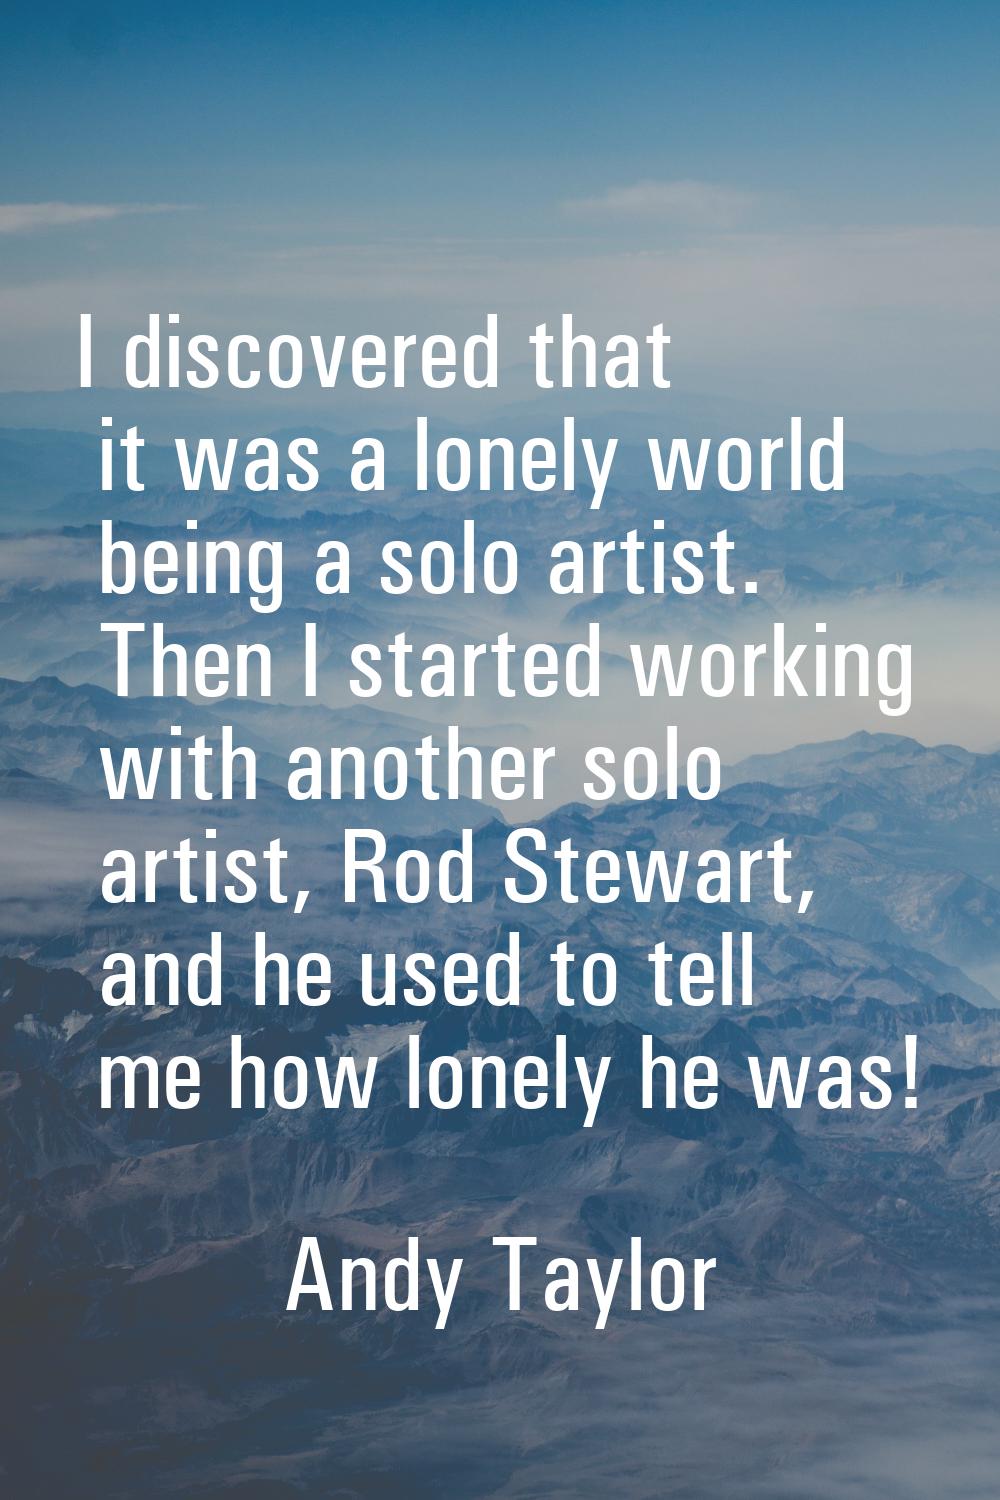 I discovered that it was a lonely world being a solo artist. Then I started working with another so